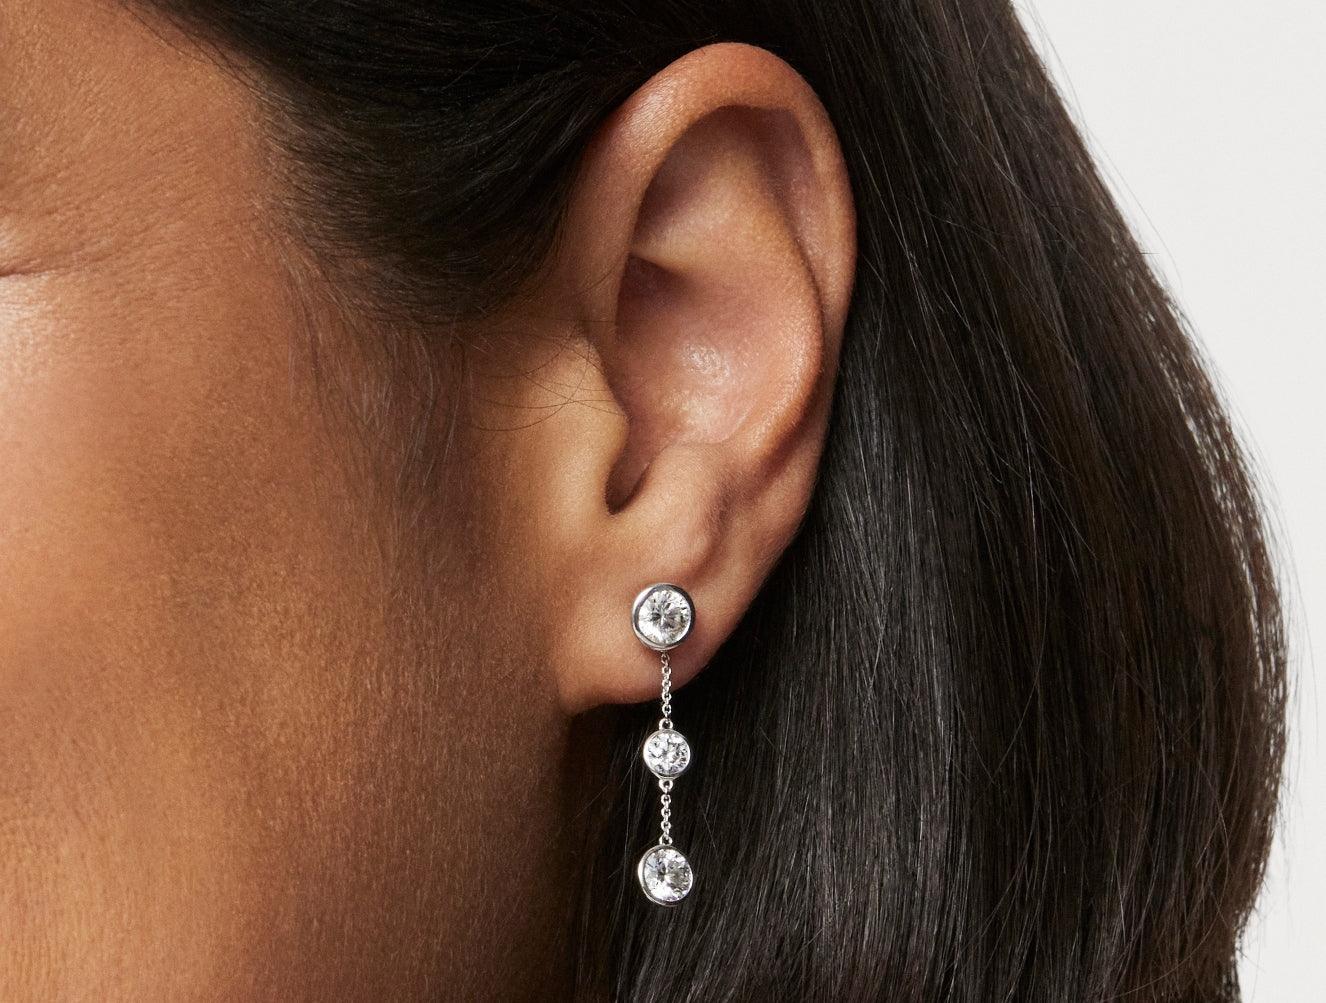 Close up model shot of 1.5 carat double round brilliant bezel drop earring jacket in 14k white gold with 0.5 carat round brilliant bezel stud